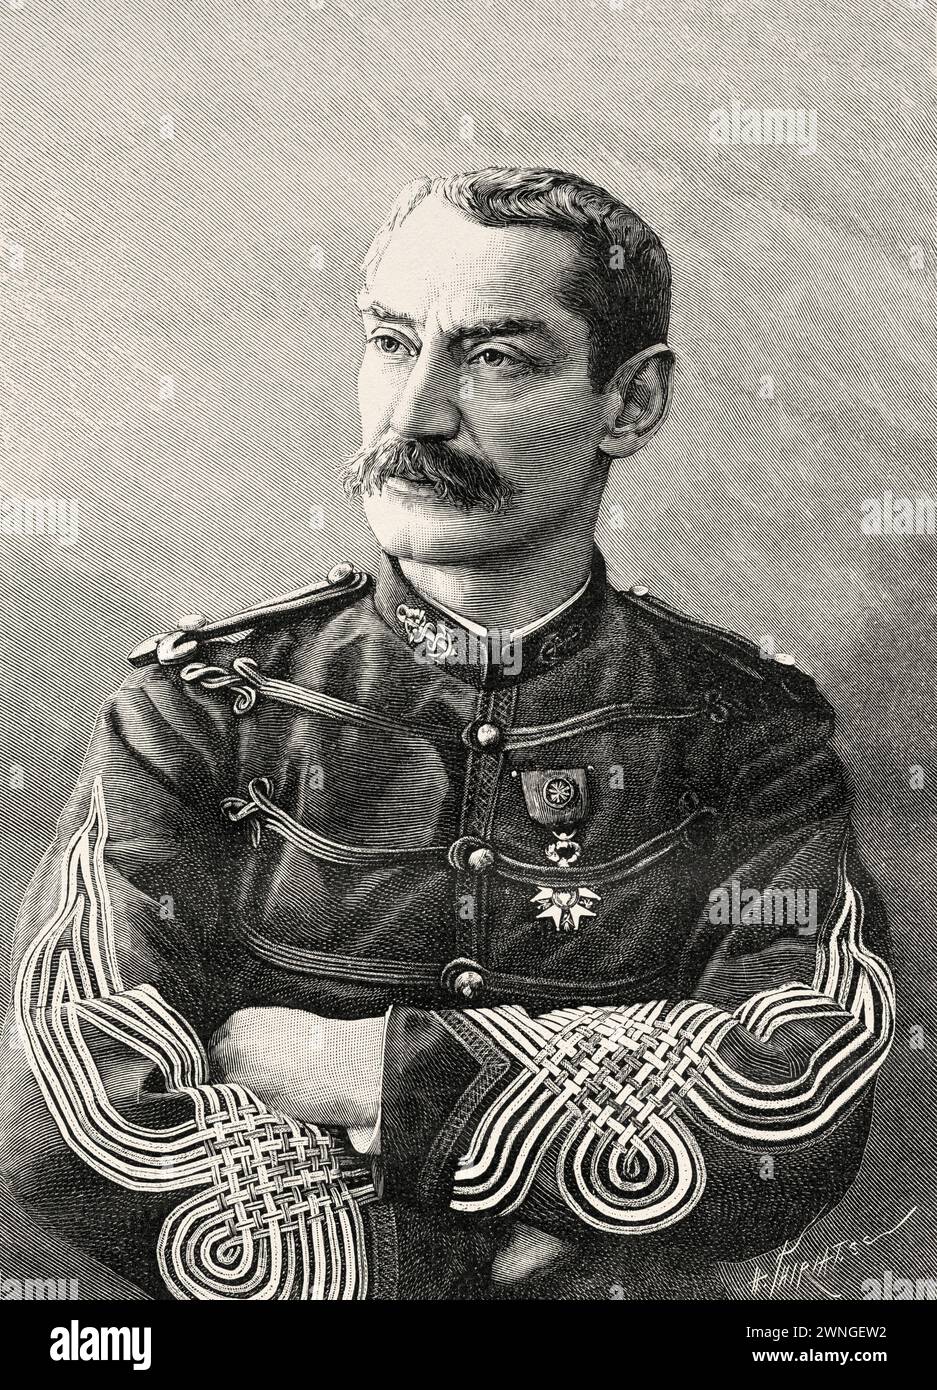 General Joseph Simon Gallieni (1849 - 1916) was a French military officer, military commander and administrator in the French colonies. Africa. Two campaigns in French Sudan, 1886-1888 by Joseph Simon Gallieni (1849 - 1916) Le Tour du Monde 1890 Stock Photo